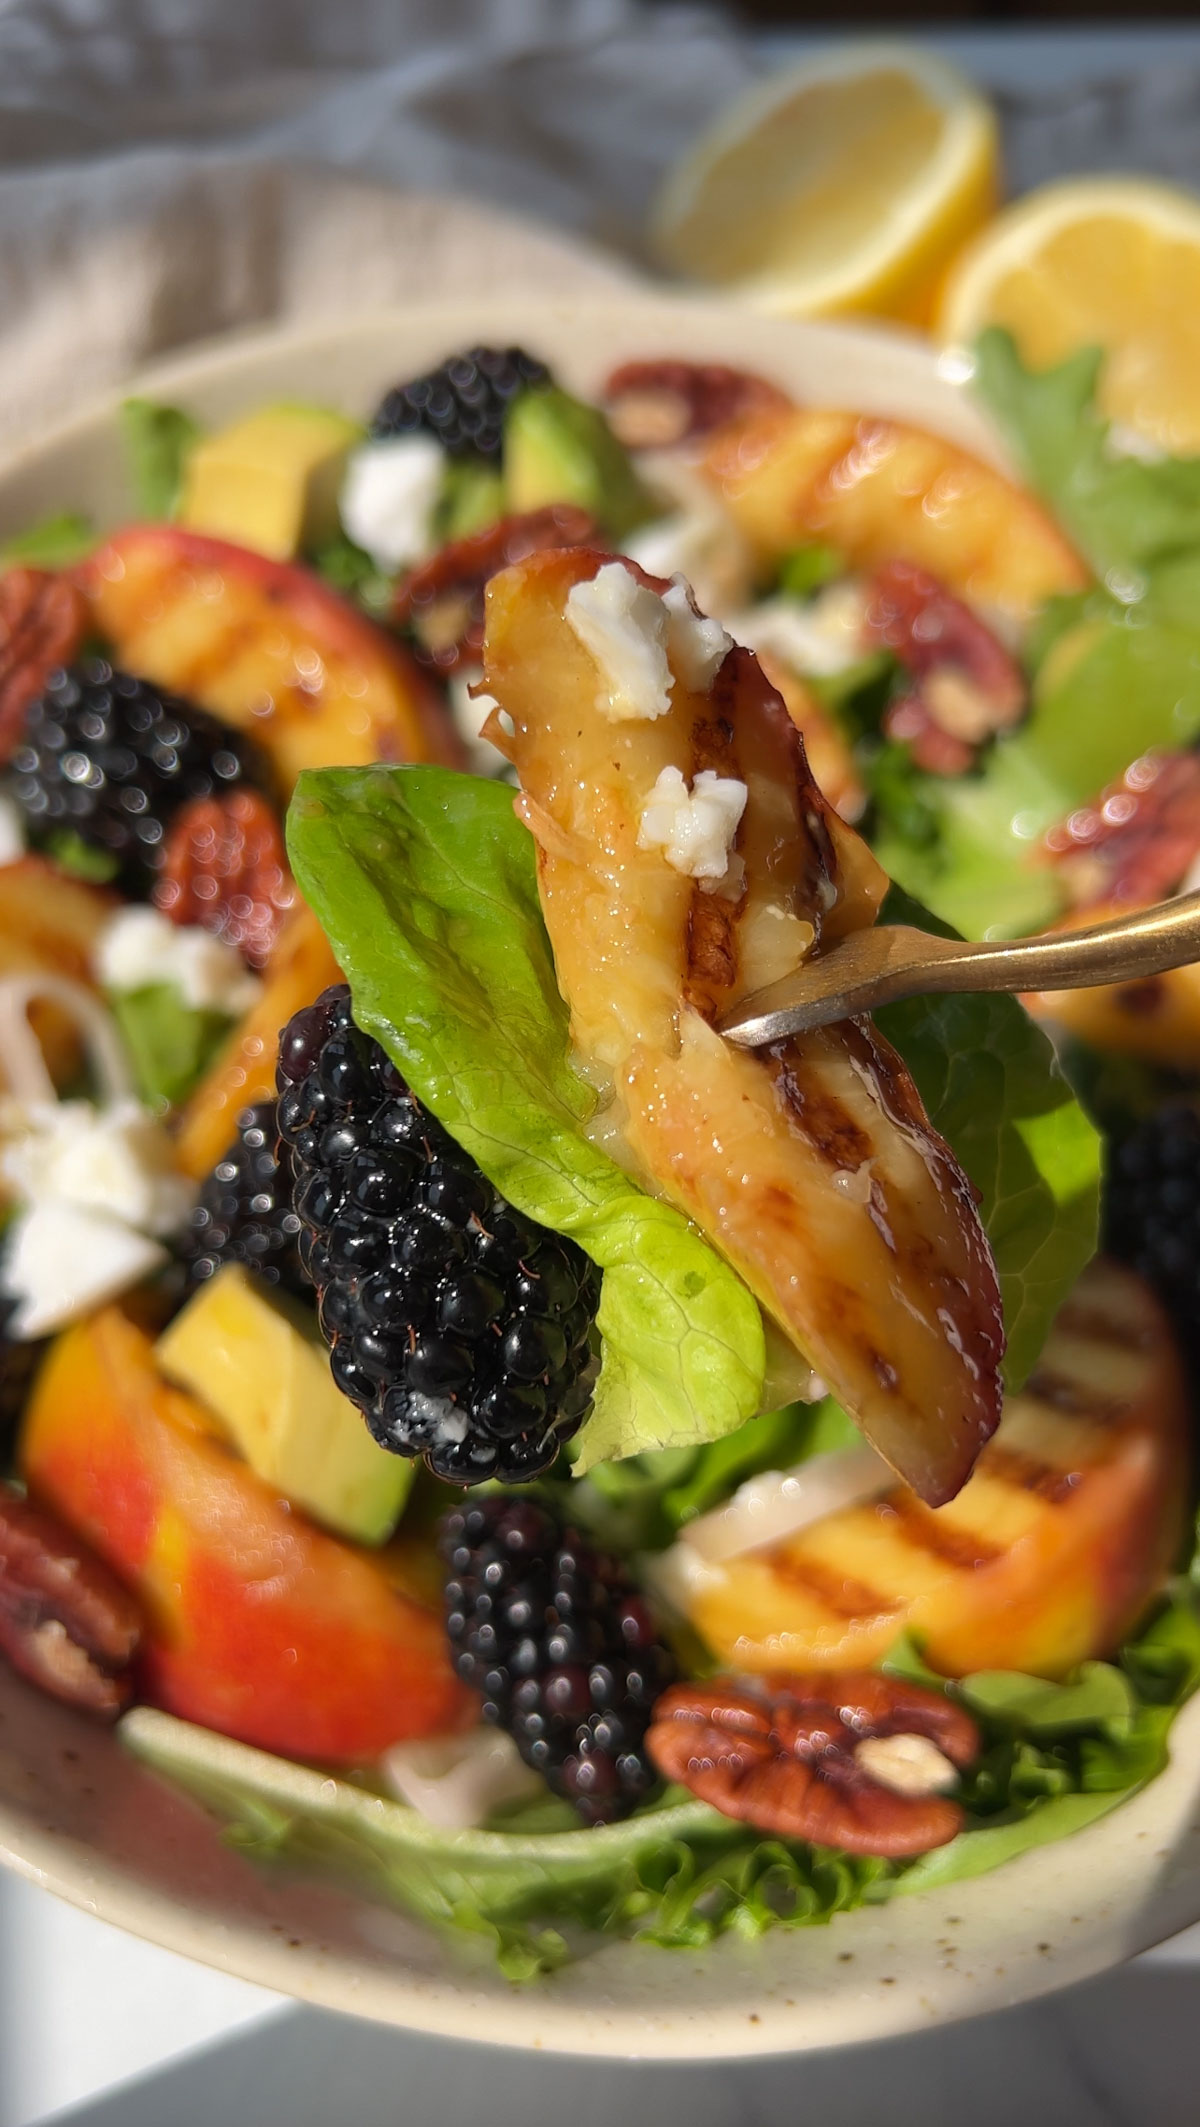 A fork holding a grilled peach up over the bowl of salad.